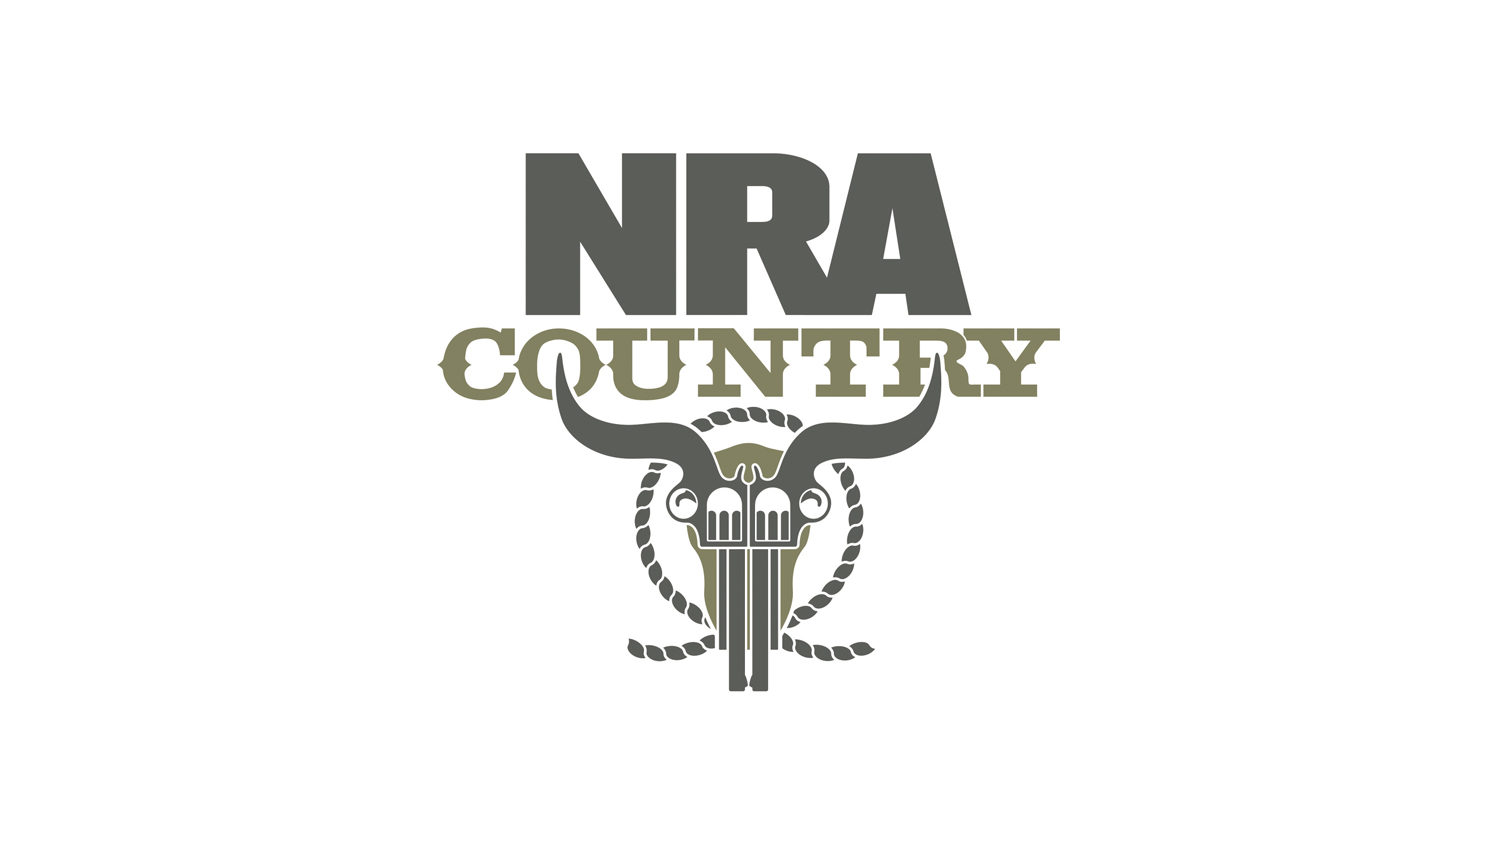 NRA Blog Get your 2019 NRA Country Concert Tickets Now!